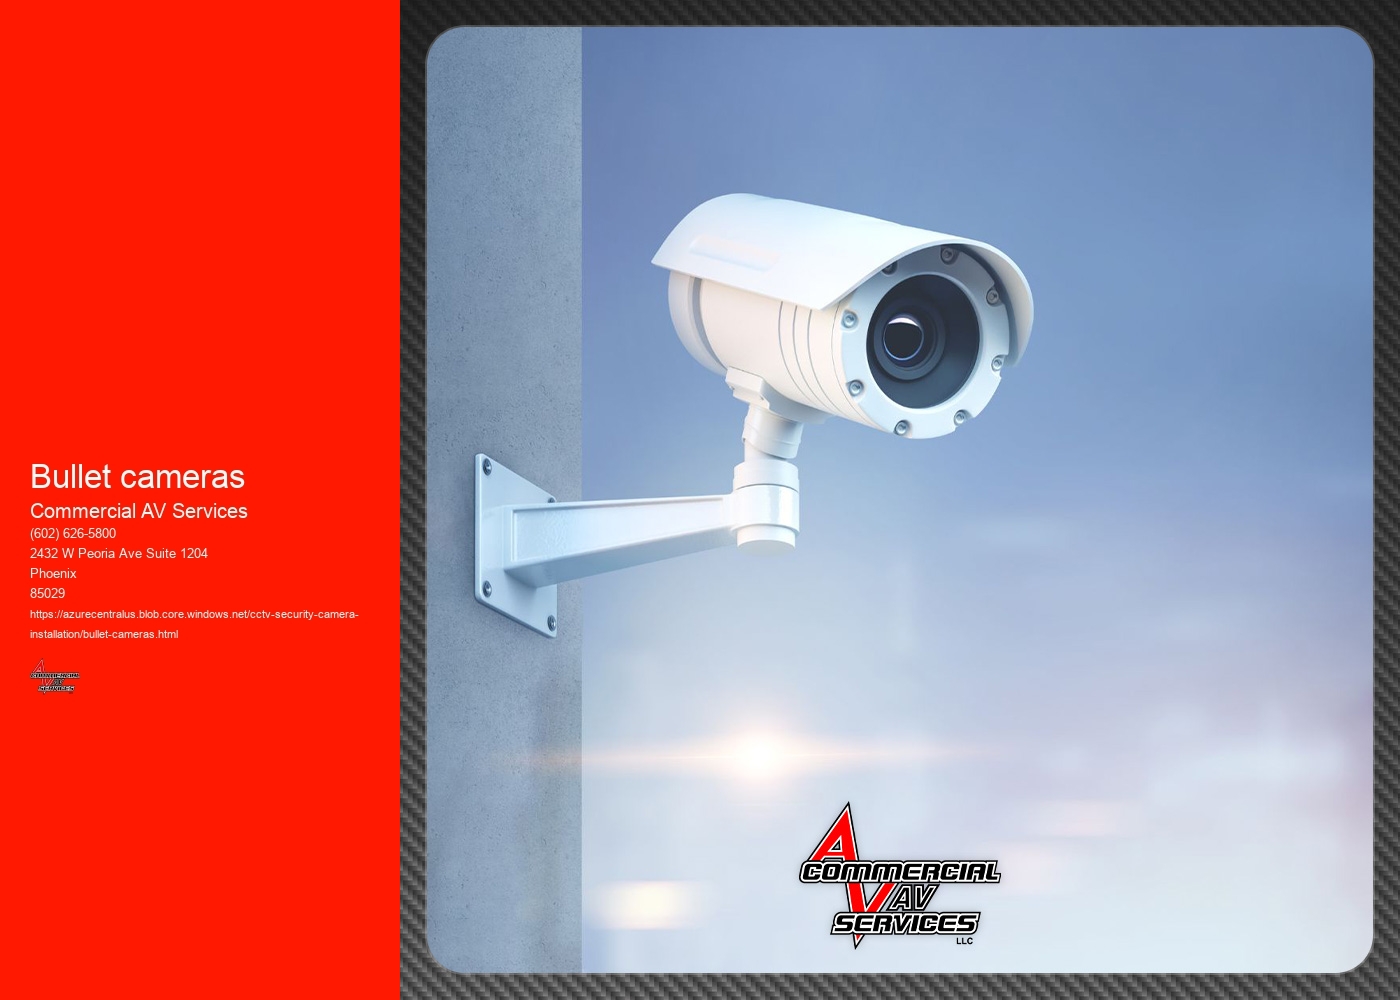 What are the key features to consider when choosing a bullet camera for long-range monitoring?